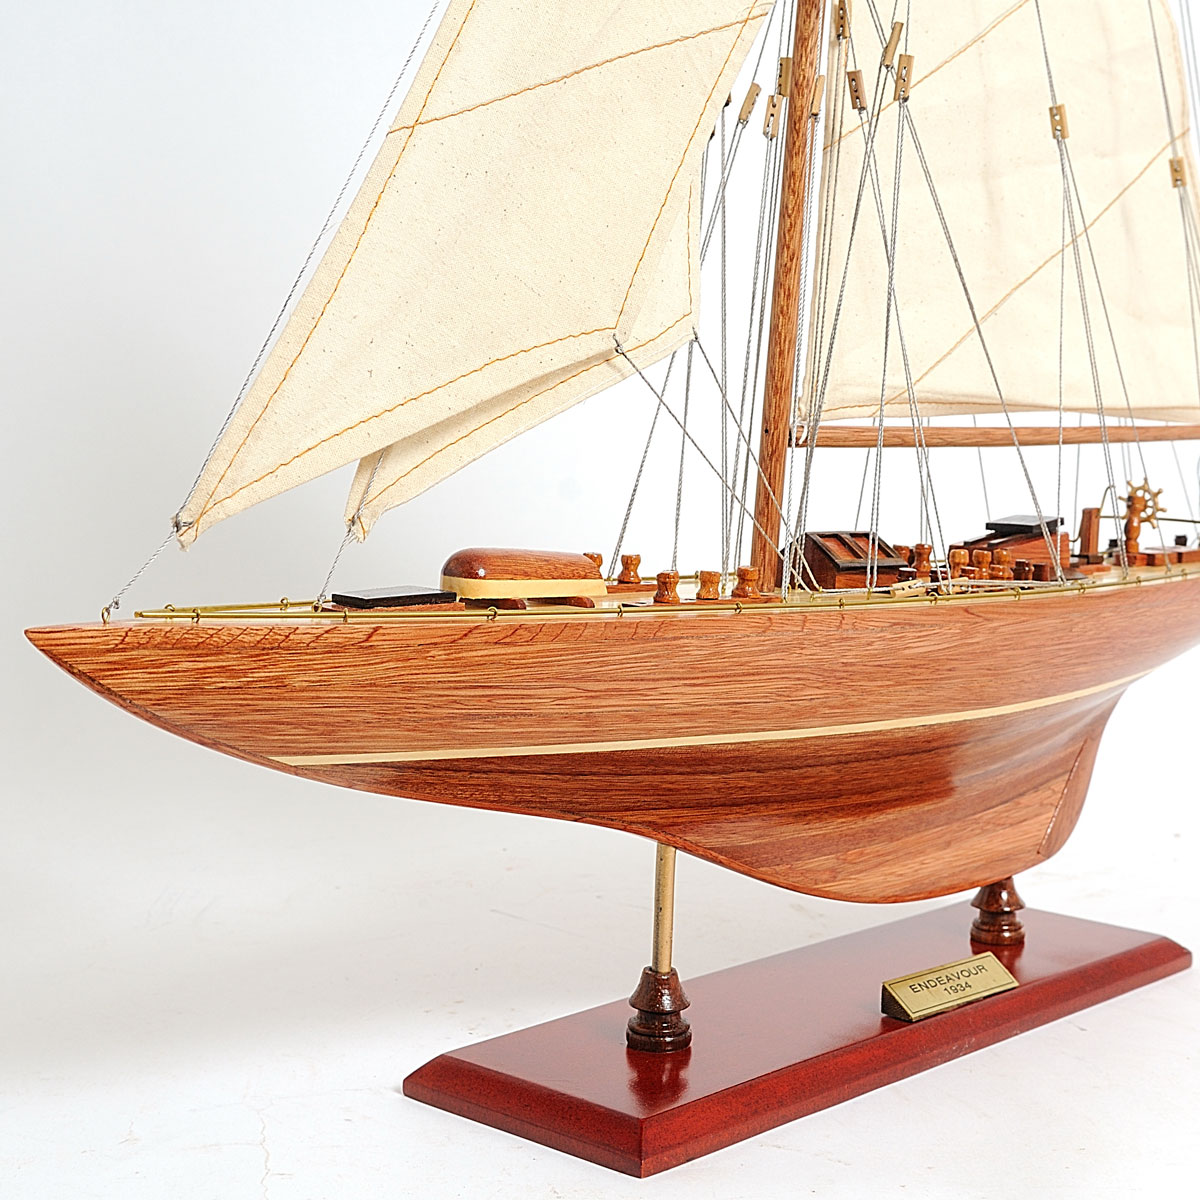 Details about   1:300 Endeavour training Ship sailboat motor boat model with light 